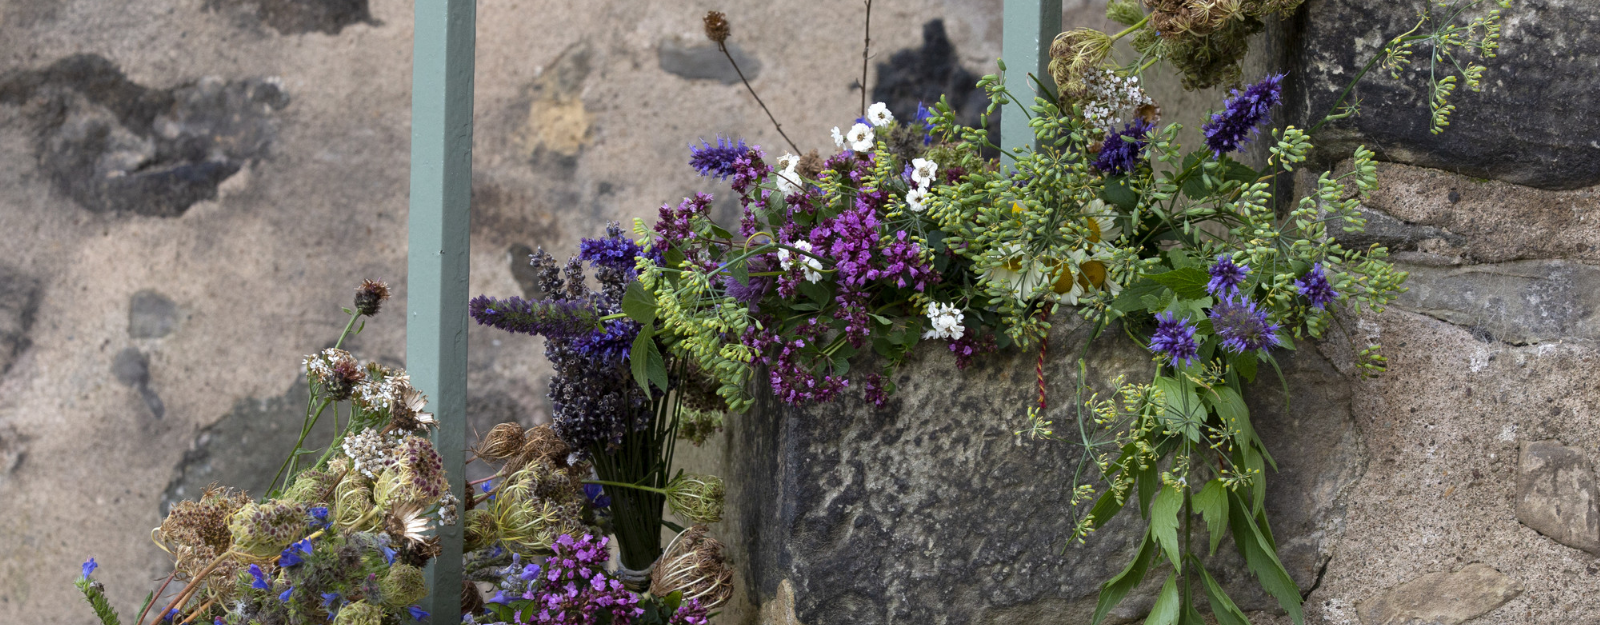 Cut flowers decorating an old stone staircase